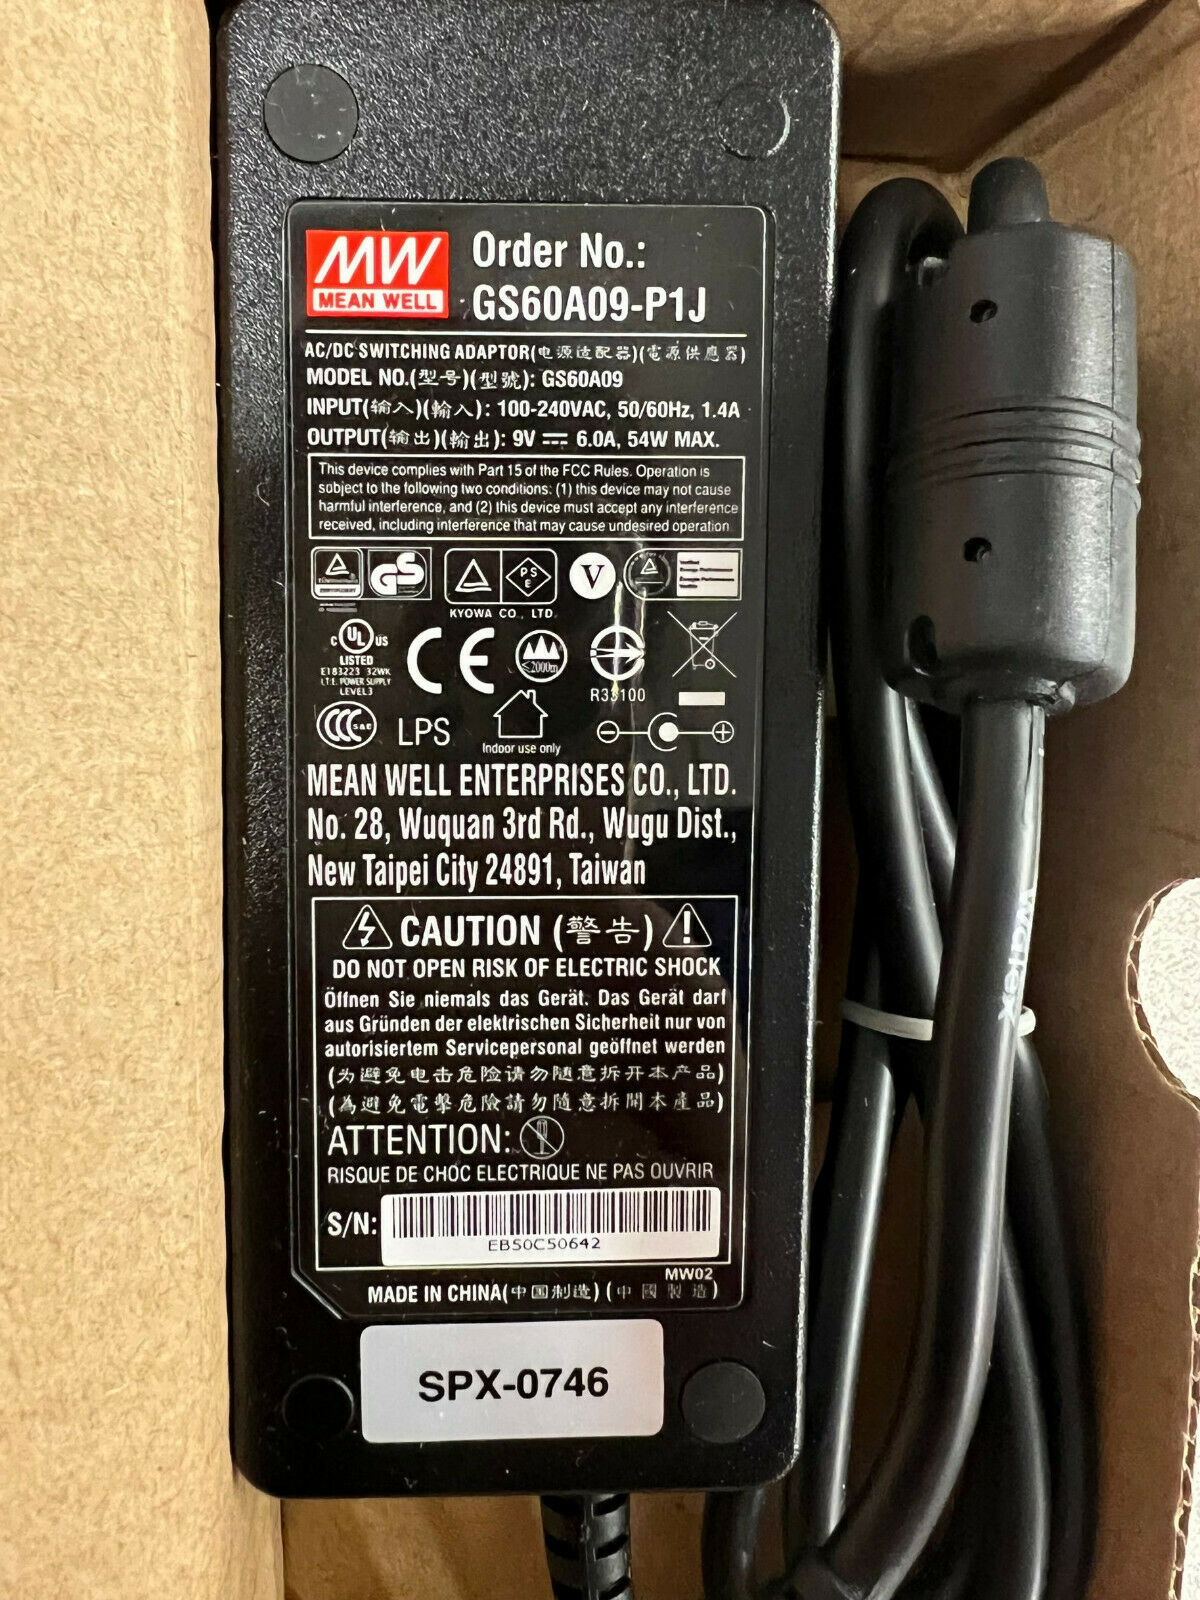 Original MW Mean Well GS60A09-P1J 9V 6A 54W AC Adapter Power Supply Cord Charger - Click Image to Close